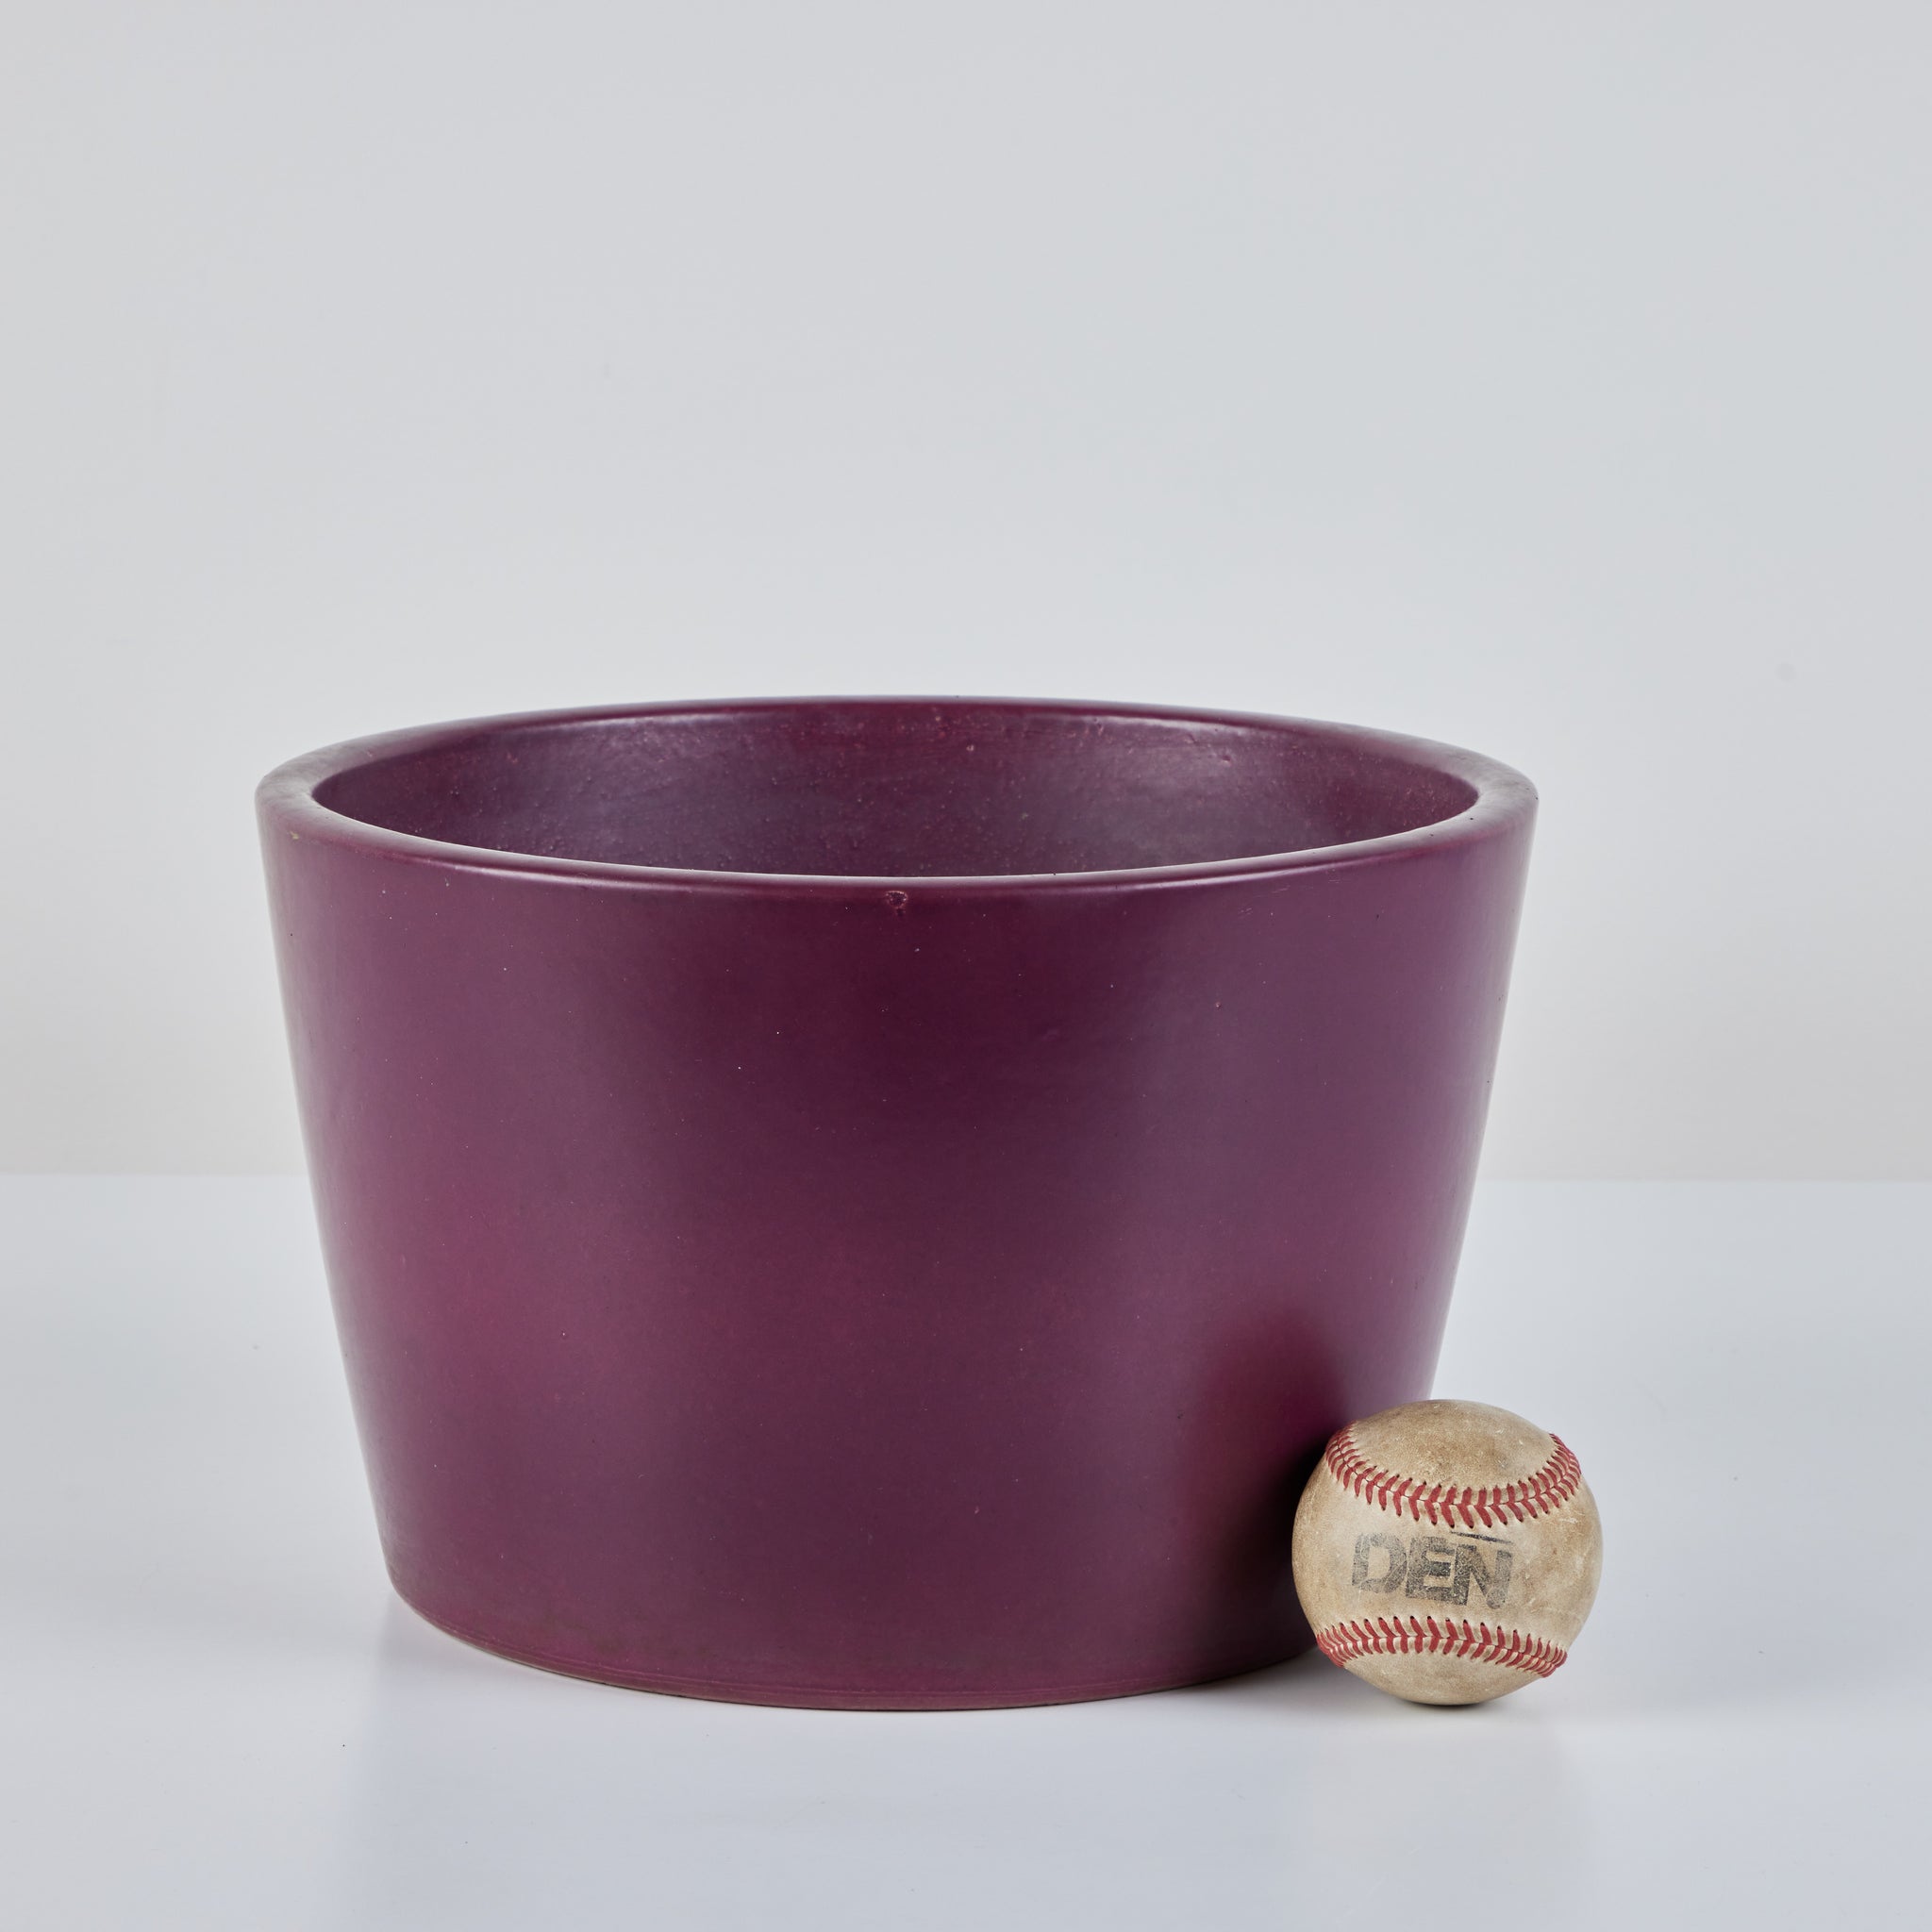 Malcolm Leland Purple Planter for Architectural Pottery